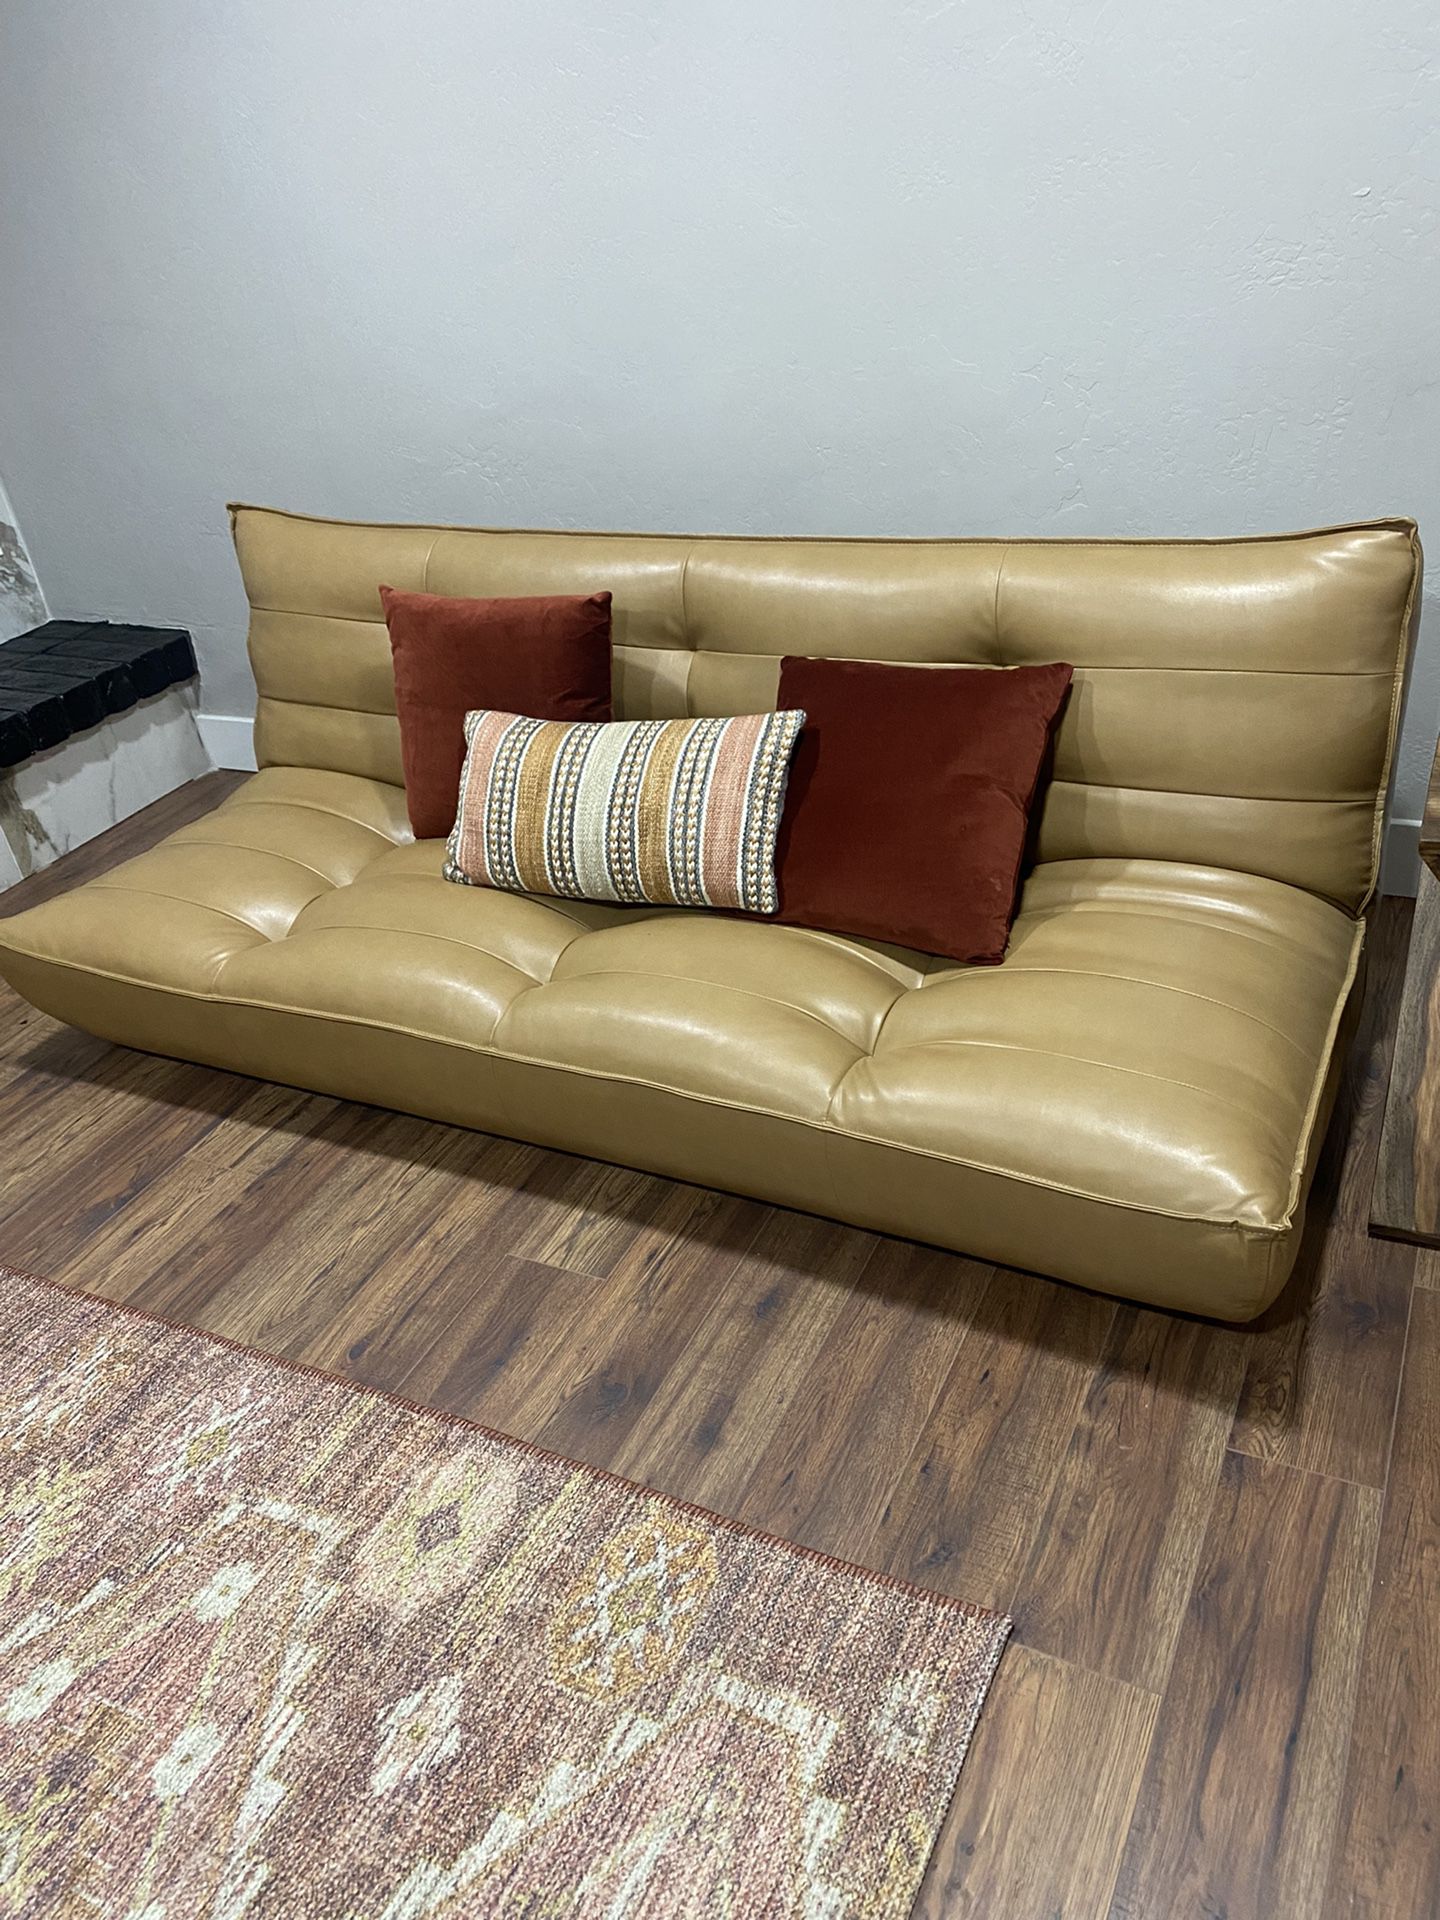 Brow Leather Couch/futon 